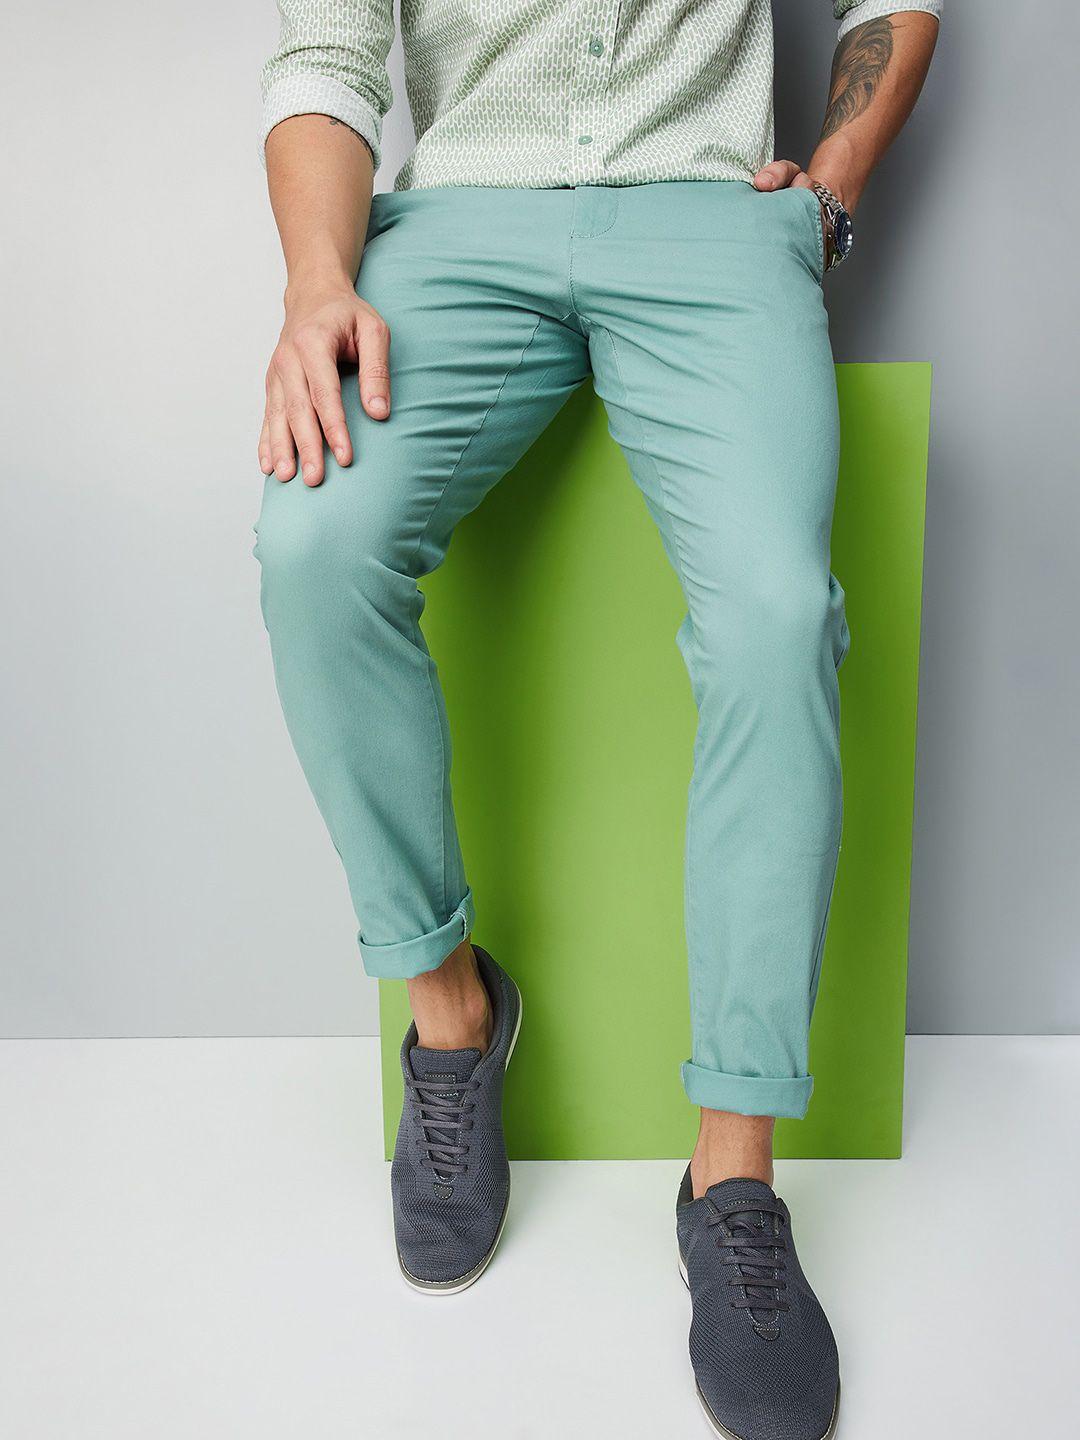 max-men-mid-rise-plain-chinos-trousers